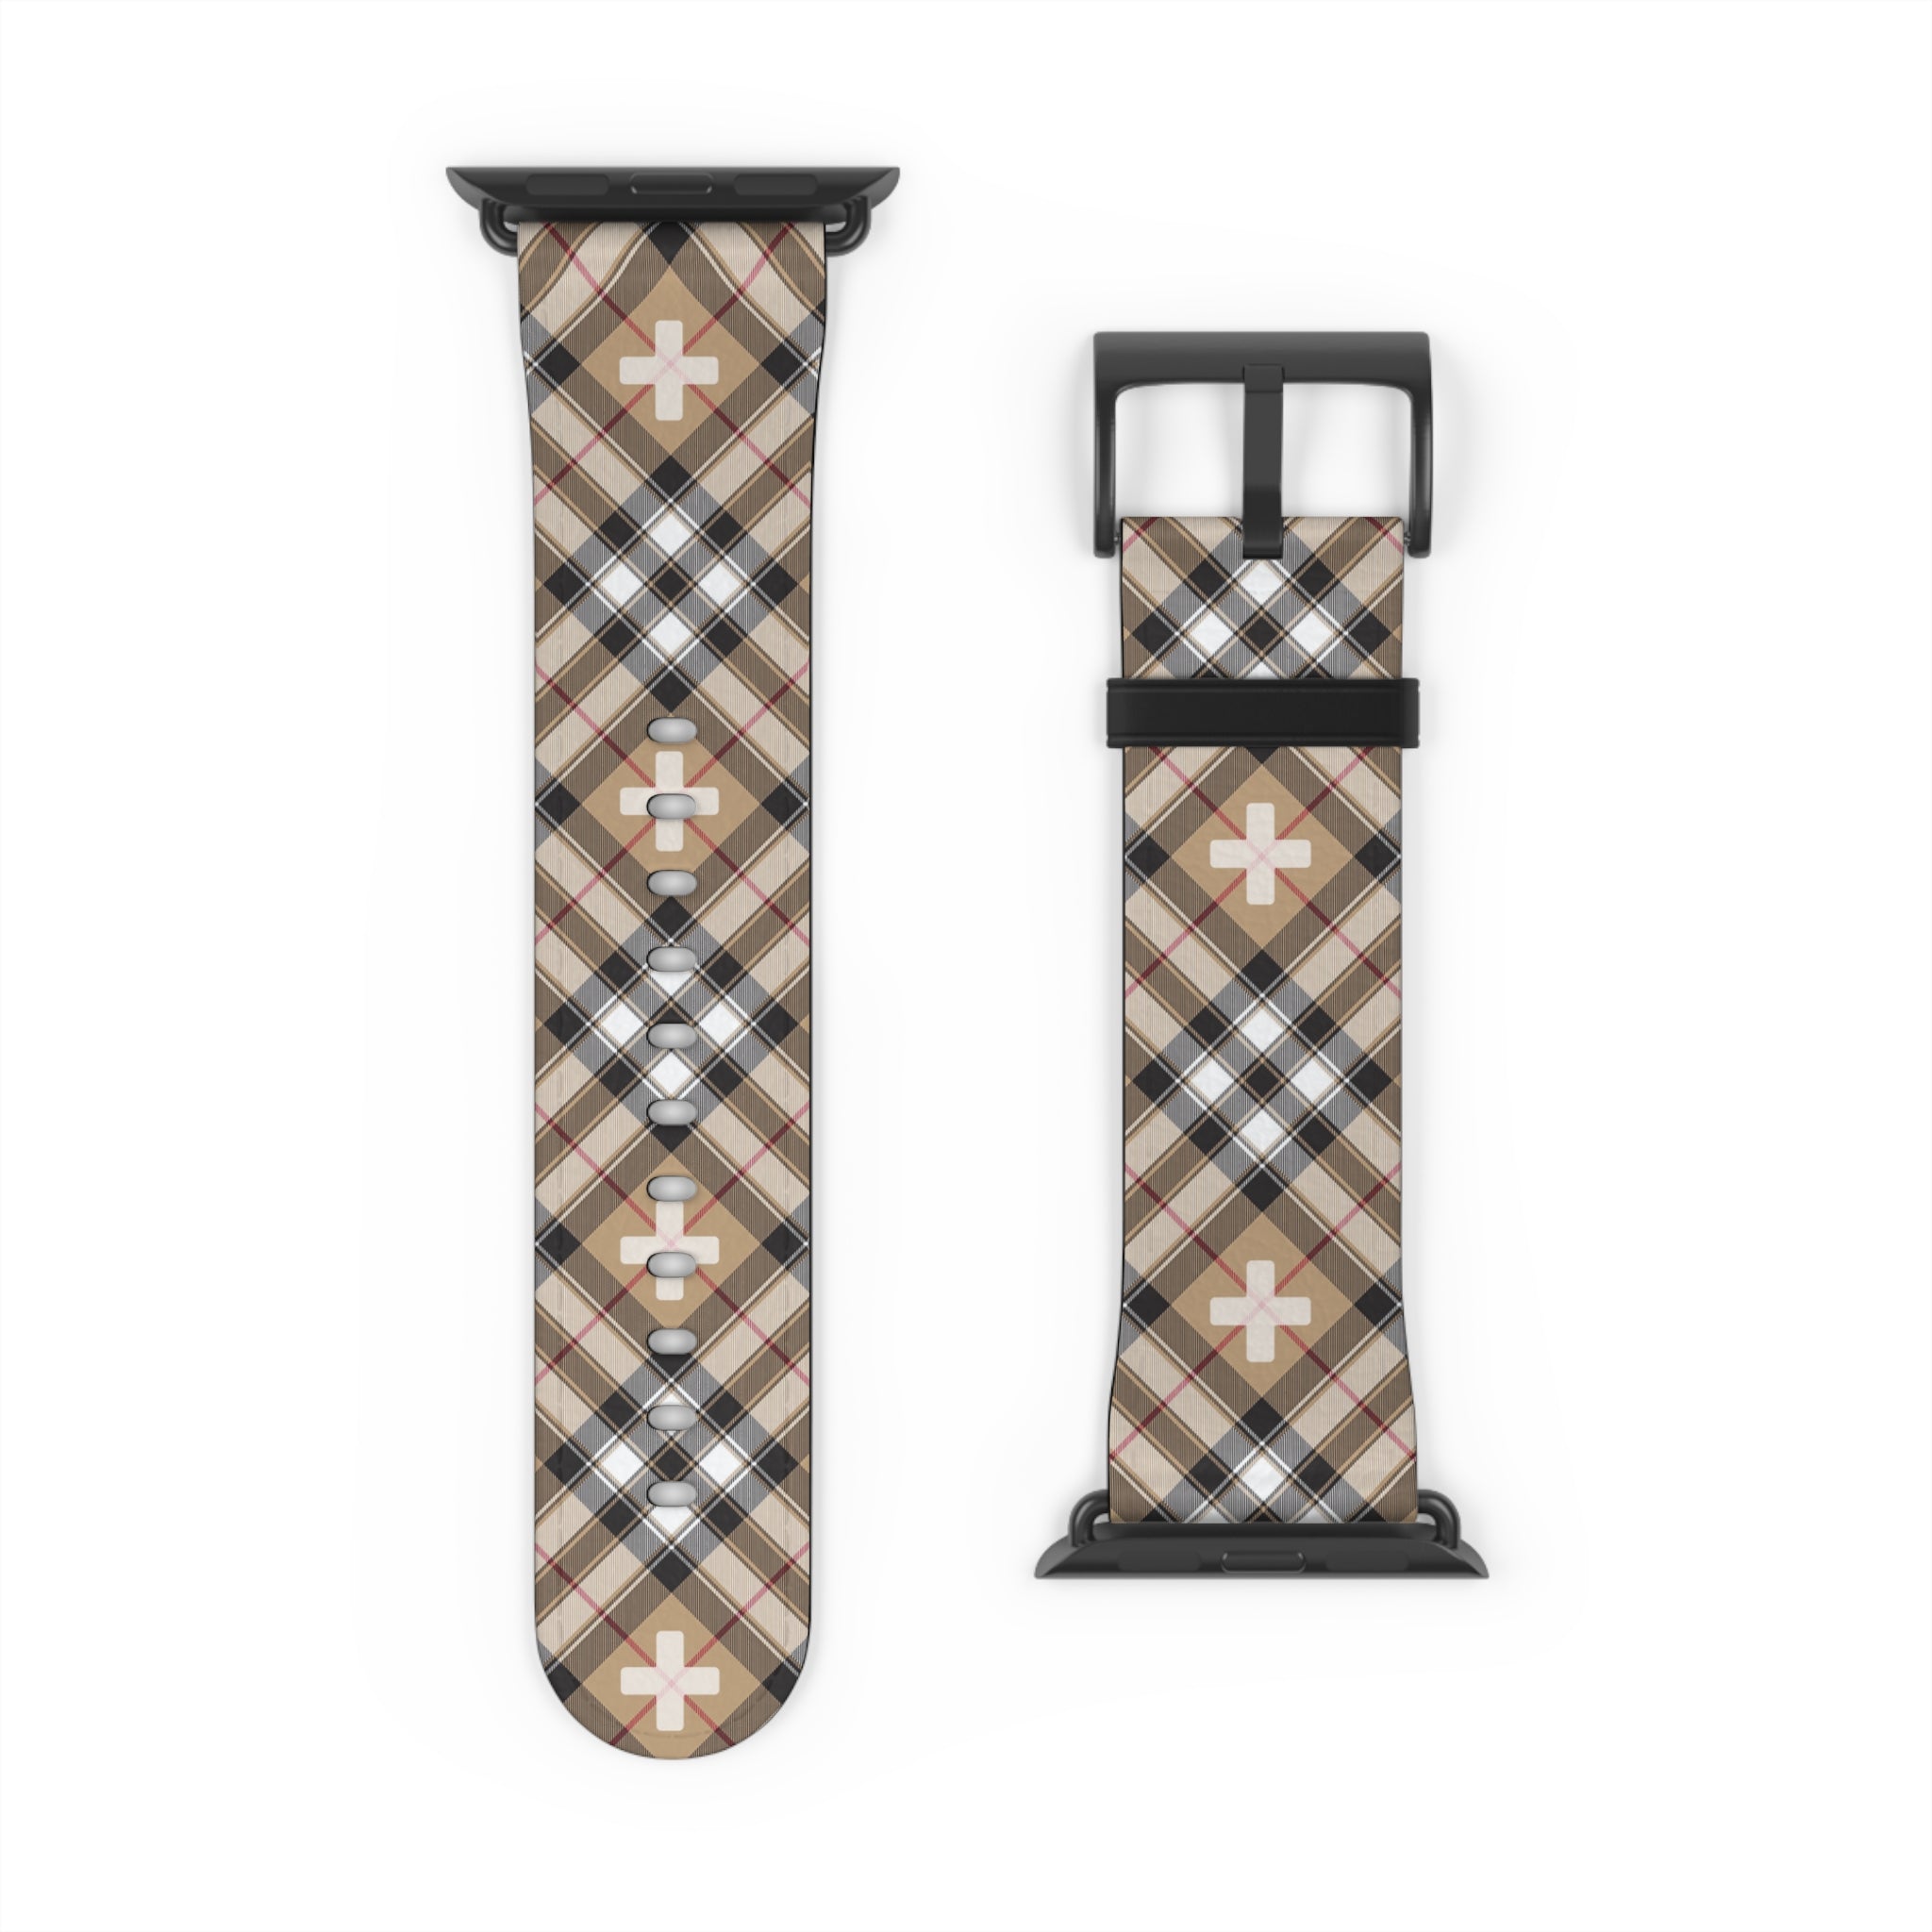  Abby Beige Plaid "Plus Sign" Watch Band for Apple Watch Accessories